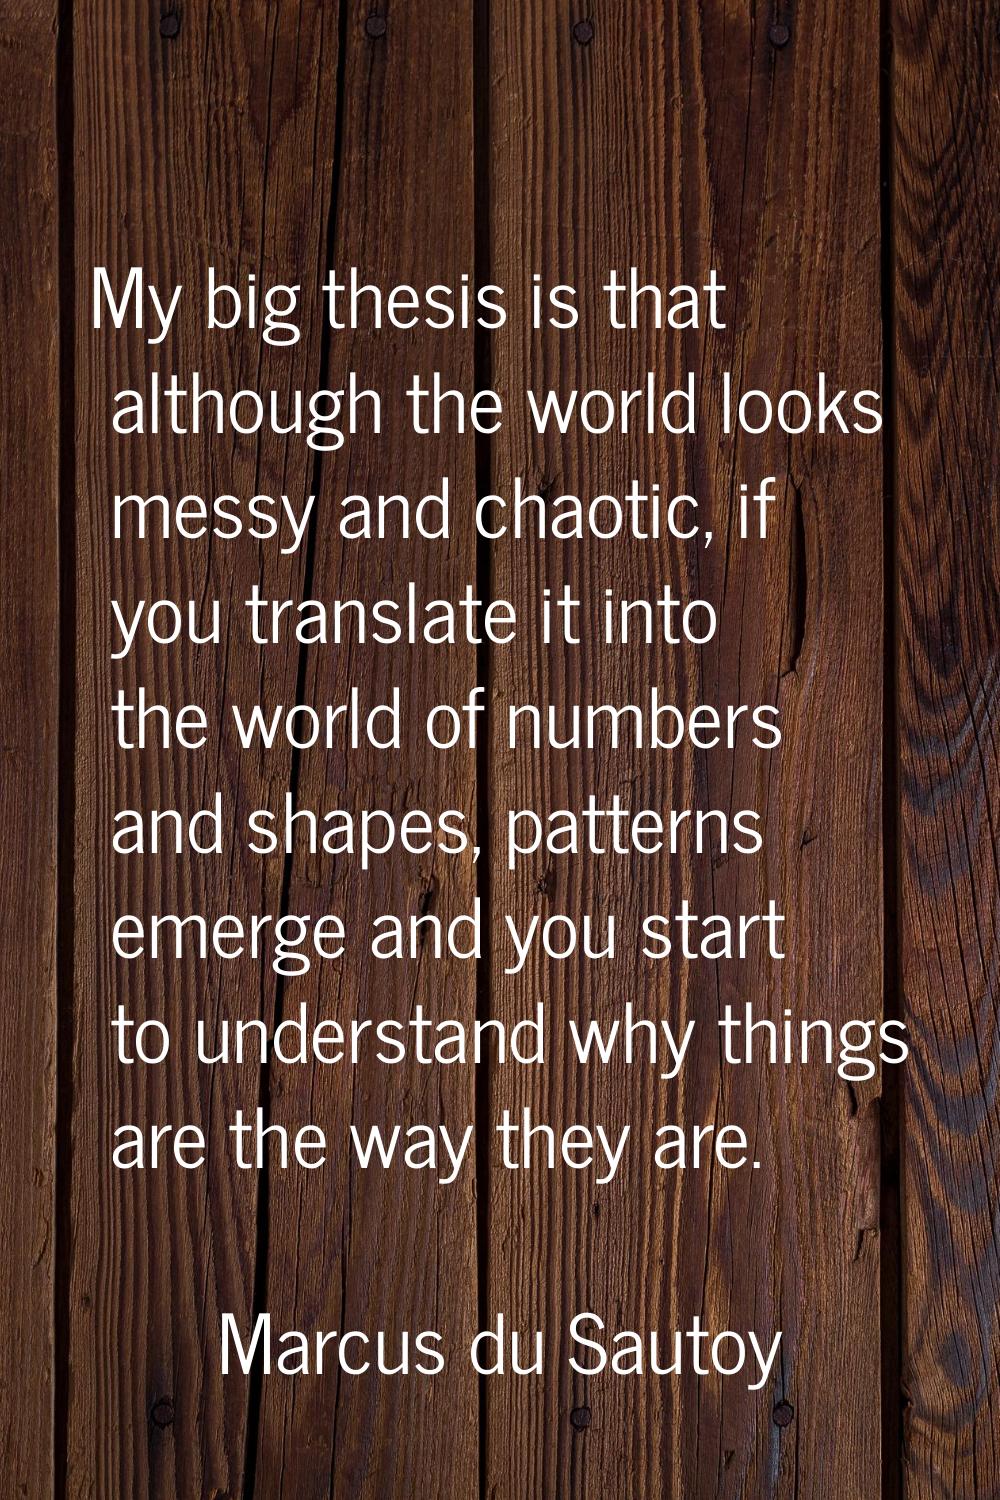 My big thesis is that although the world looks messy and chaotic, if you translate it into the worl